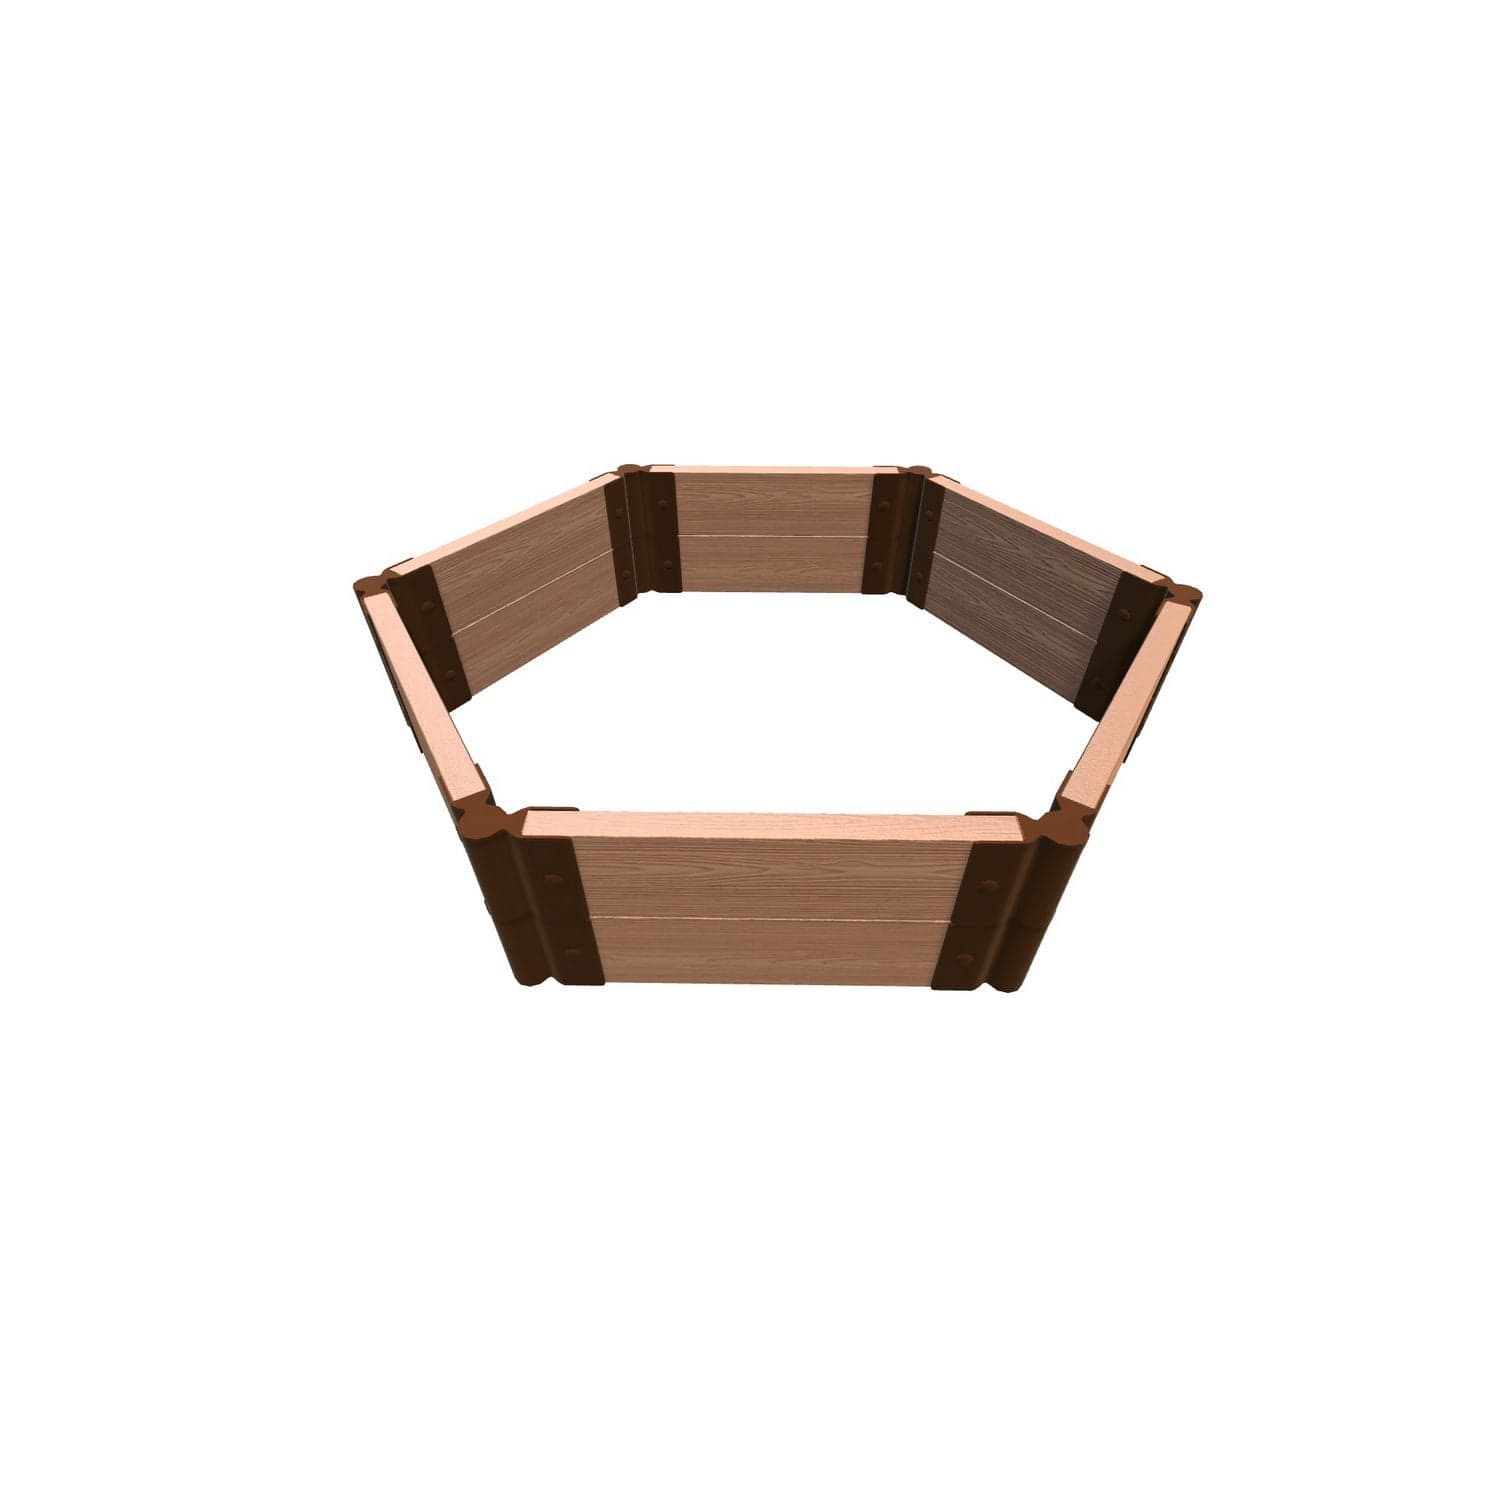 Frame It All Gardening Accessories 2" Frame It All | Tool-Free Fort Jefferson Raised Garden Bed (Hexagon) 4' X 4' X 11" - Classic Sienna 200002470